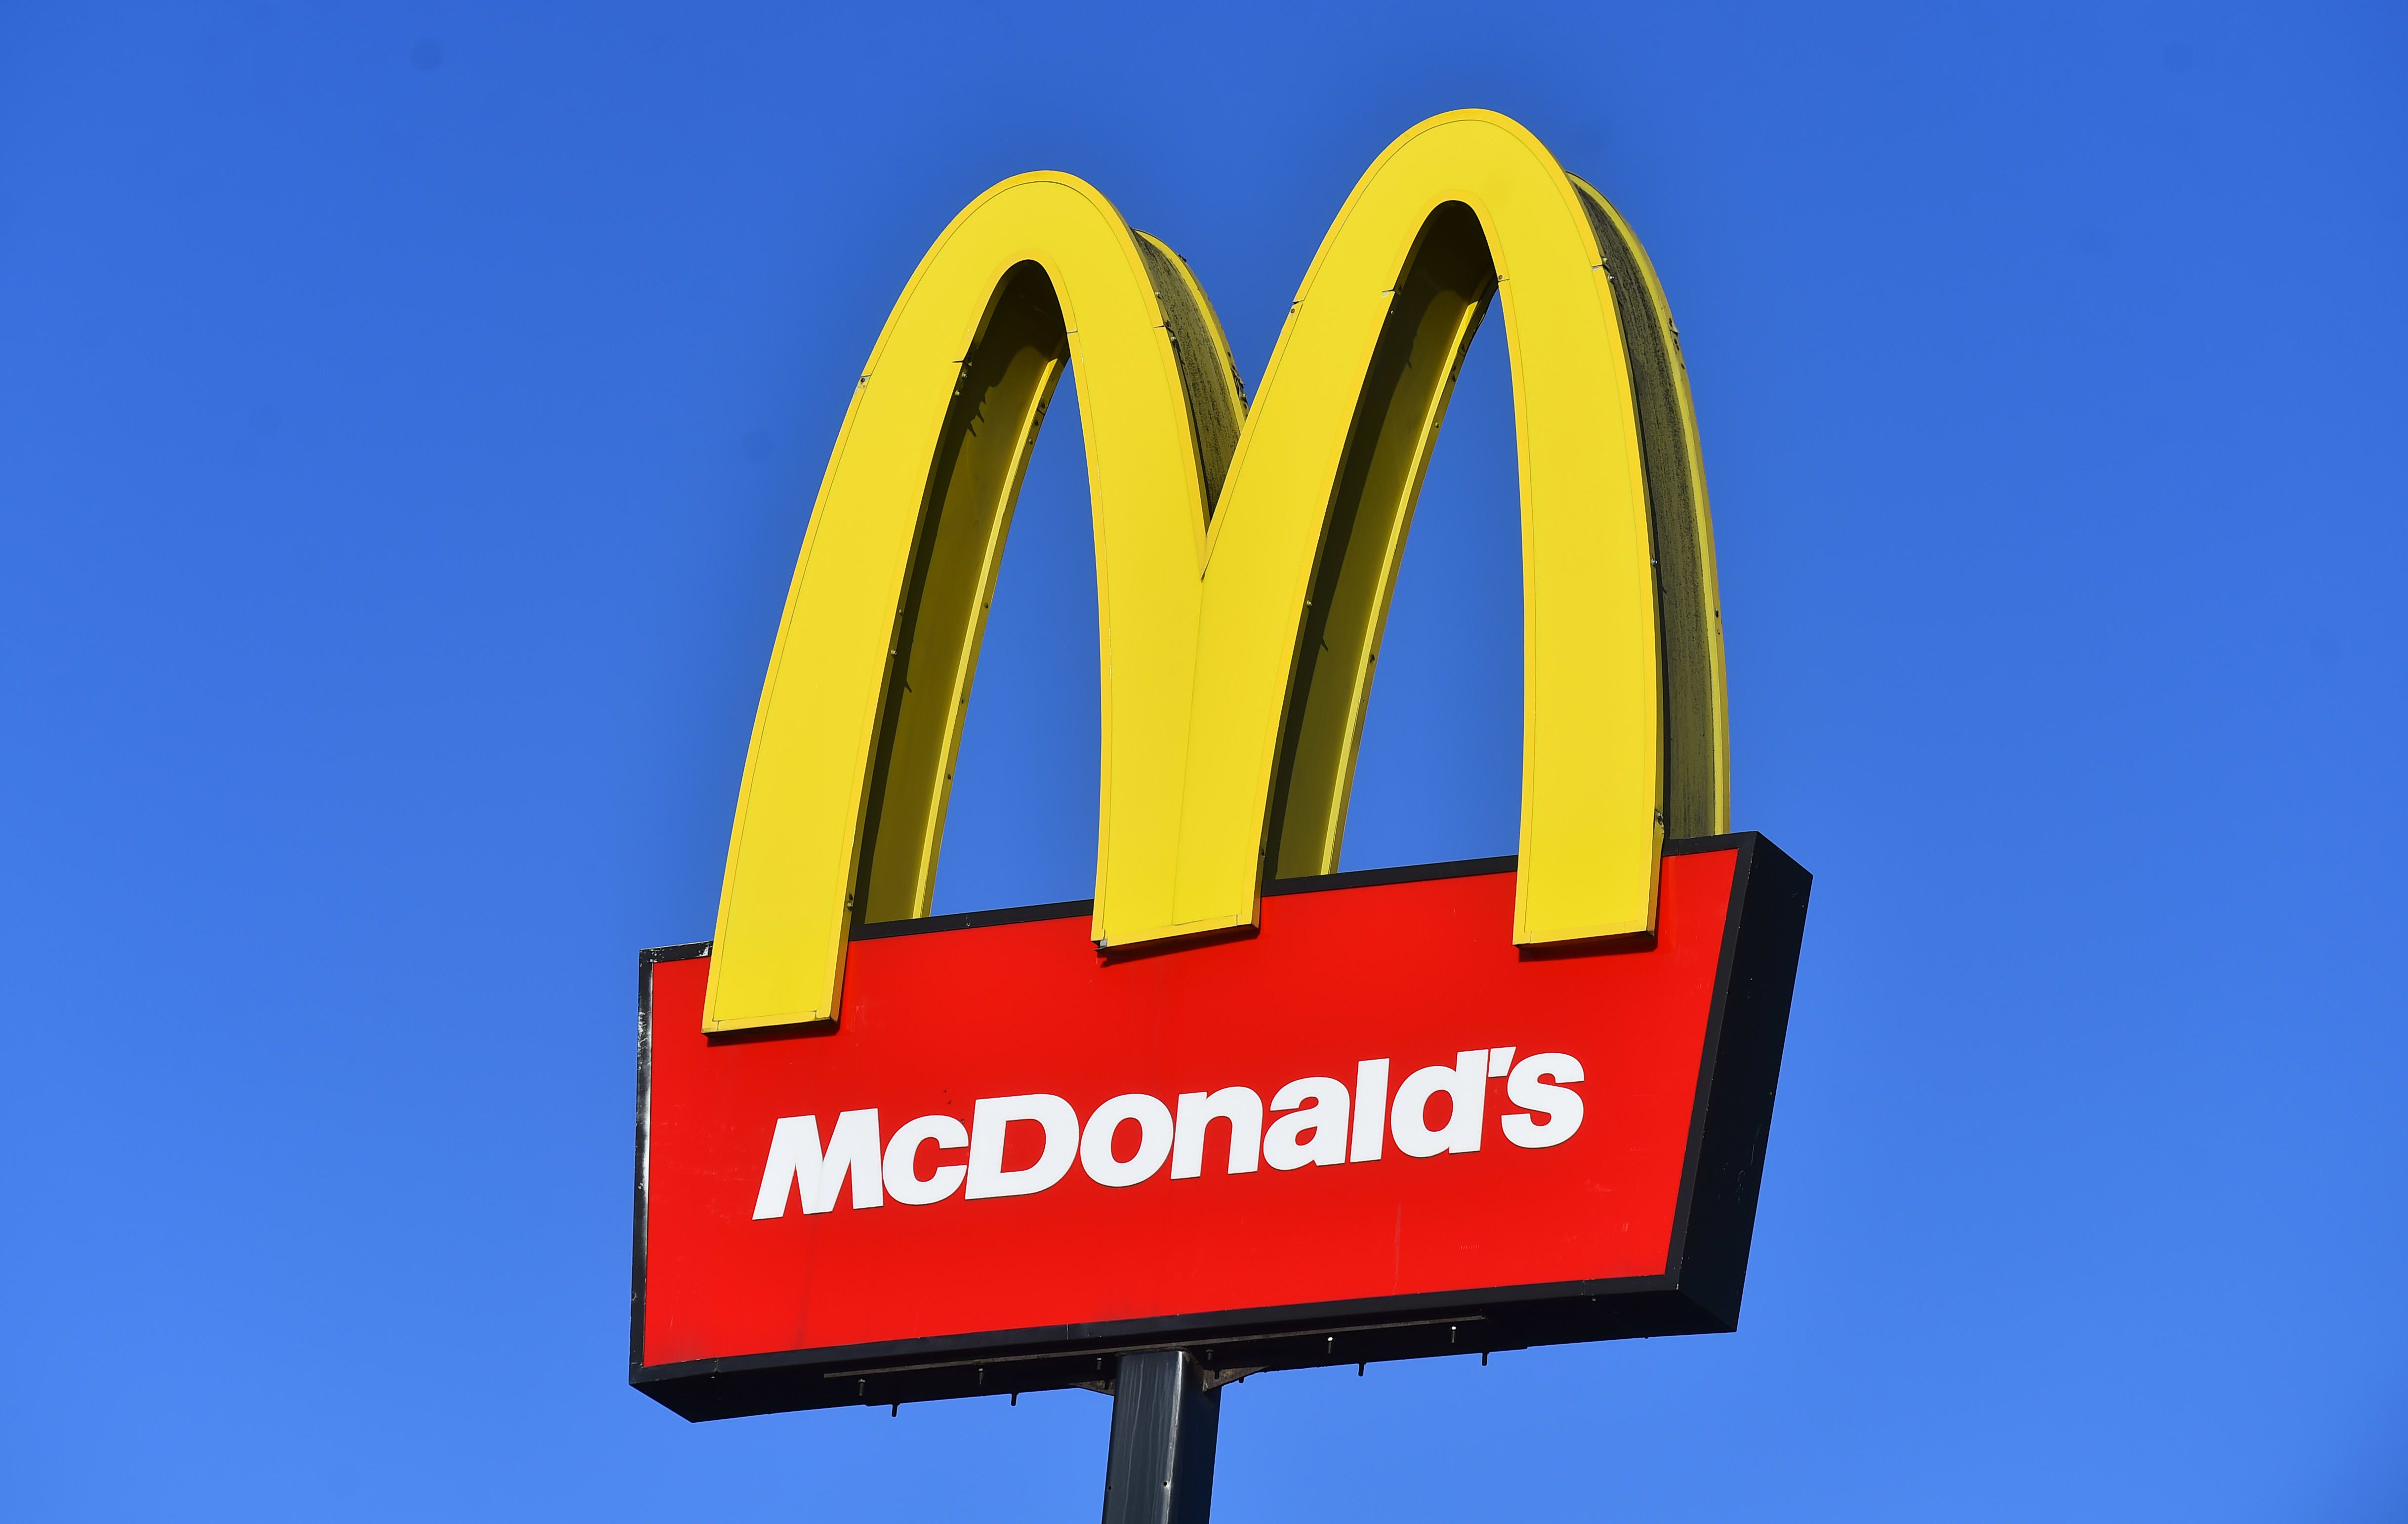 McDonald’s will reportedly close its US offices temporarily and prepare layoff notices